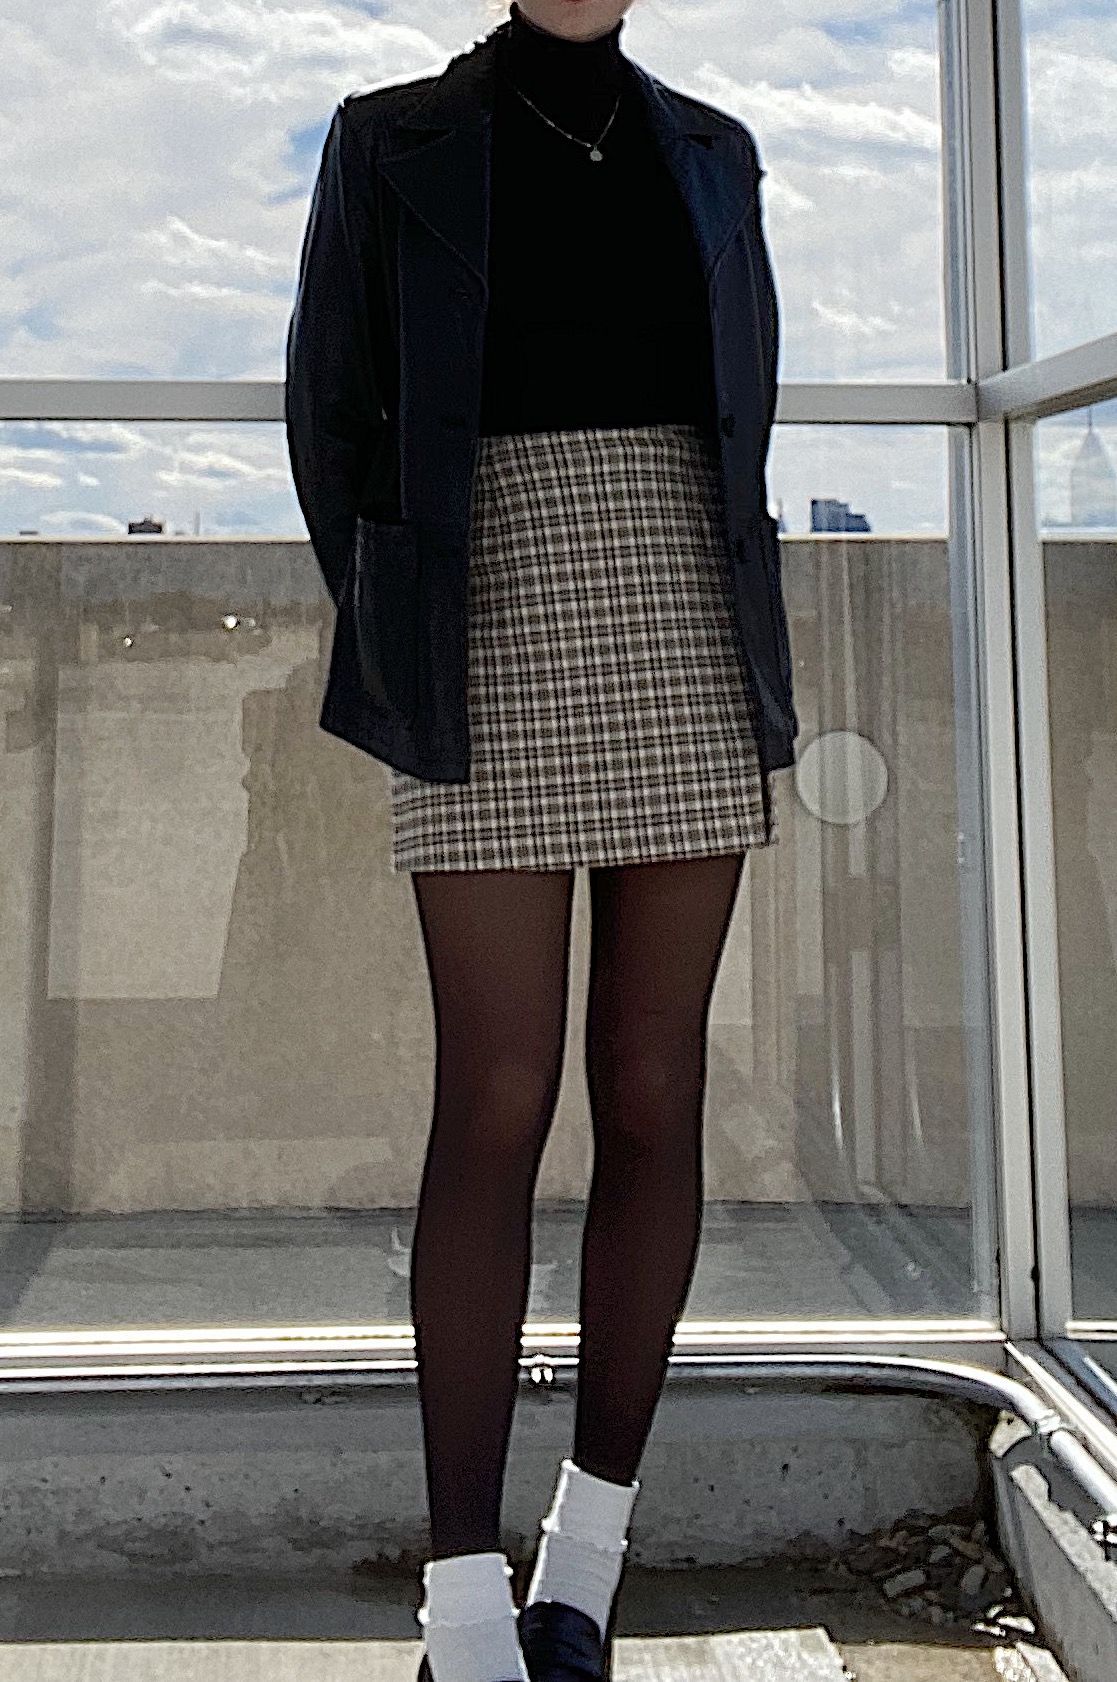 How to Wear Plaid Mini Skirt: Top 15 Outfit Ideas that Make You Look Lovely